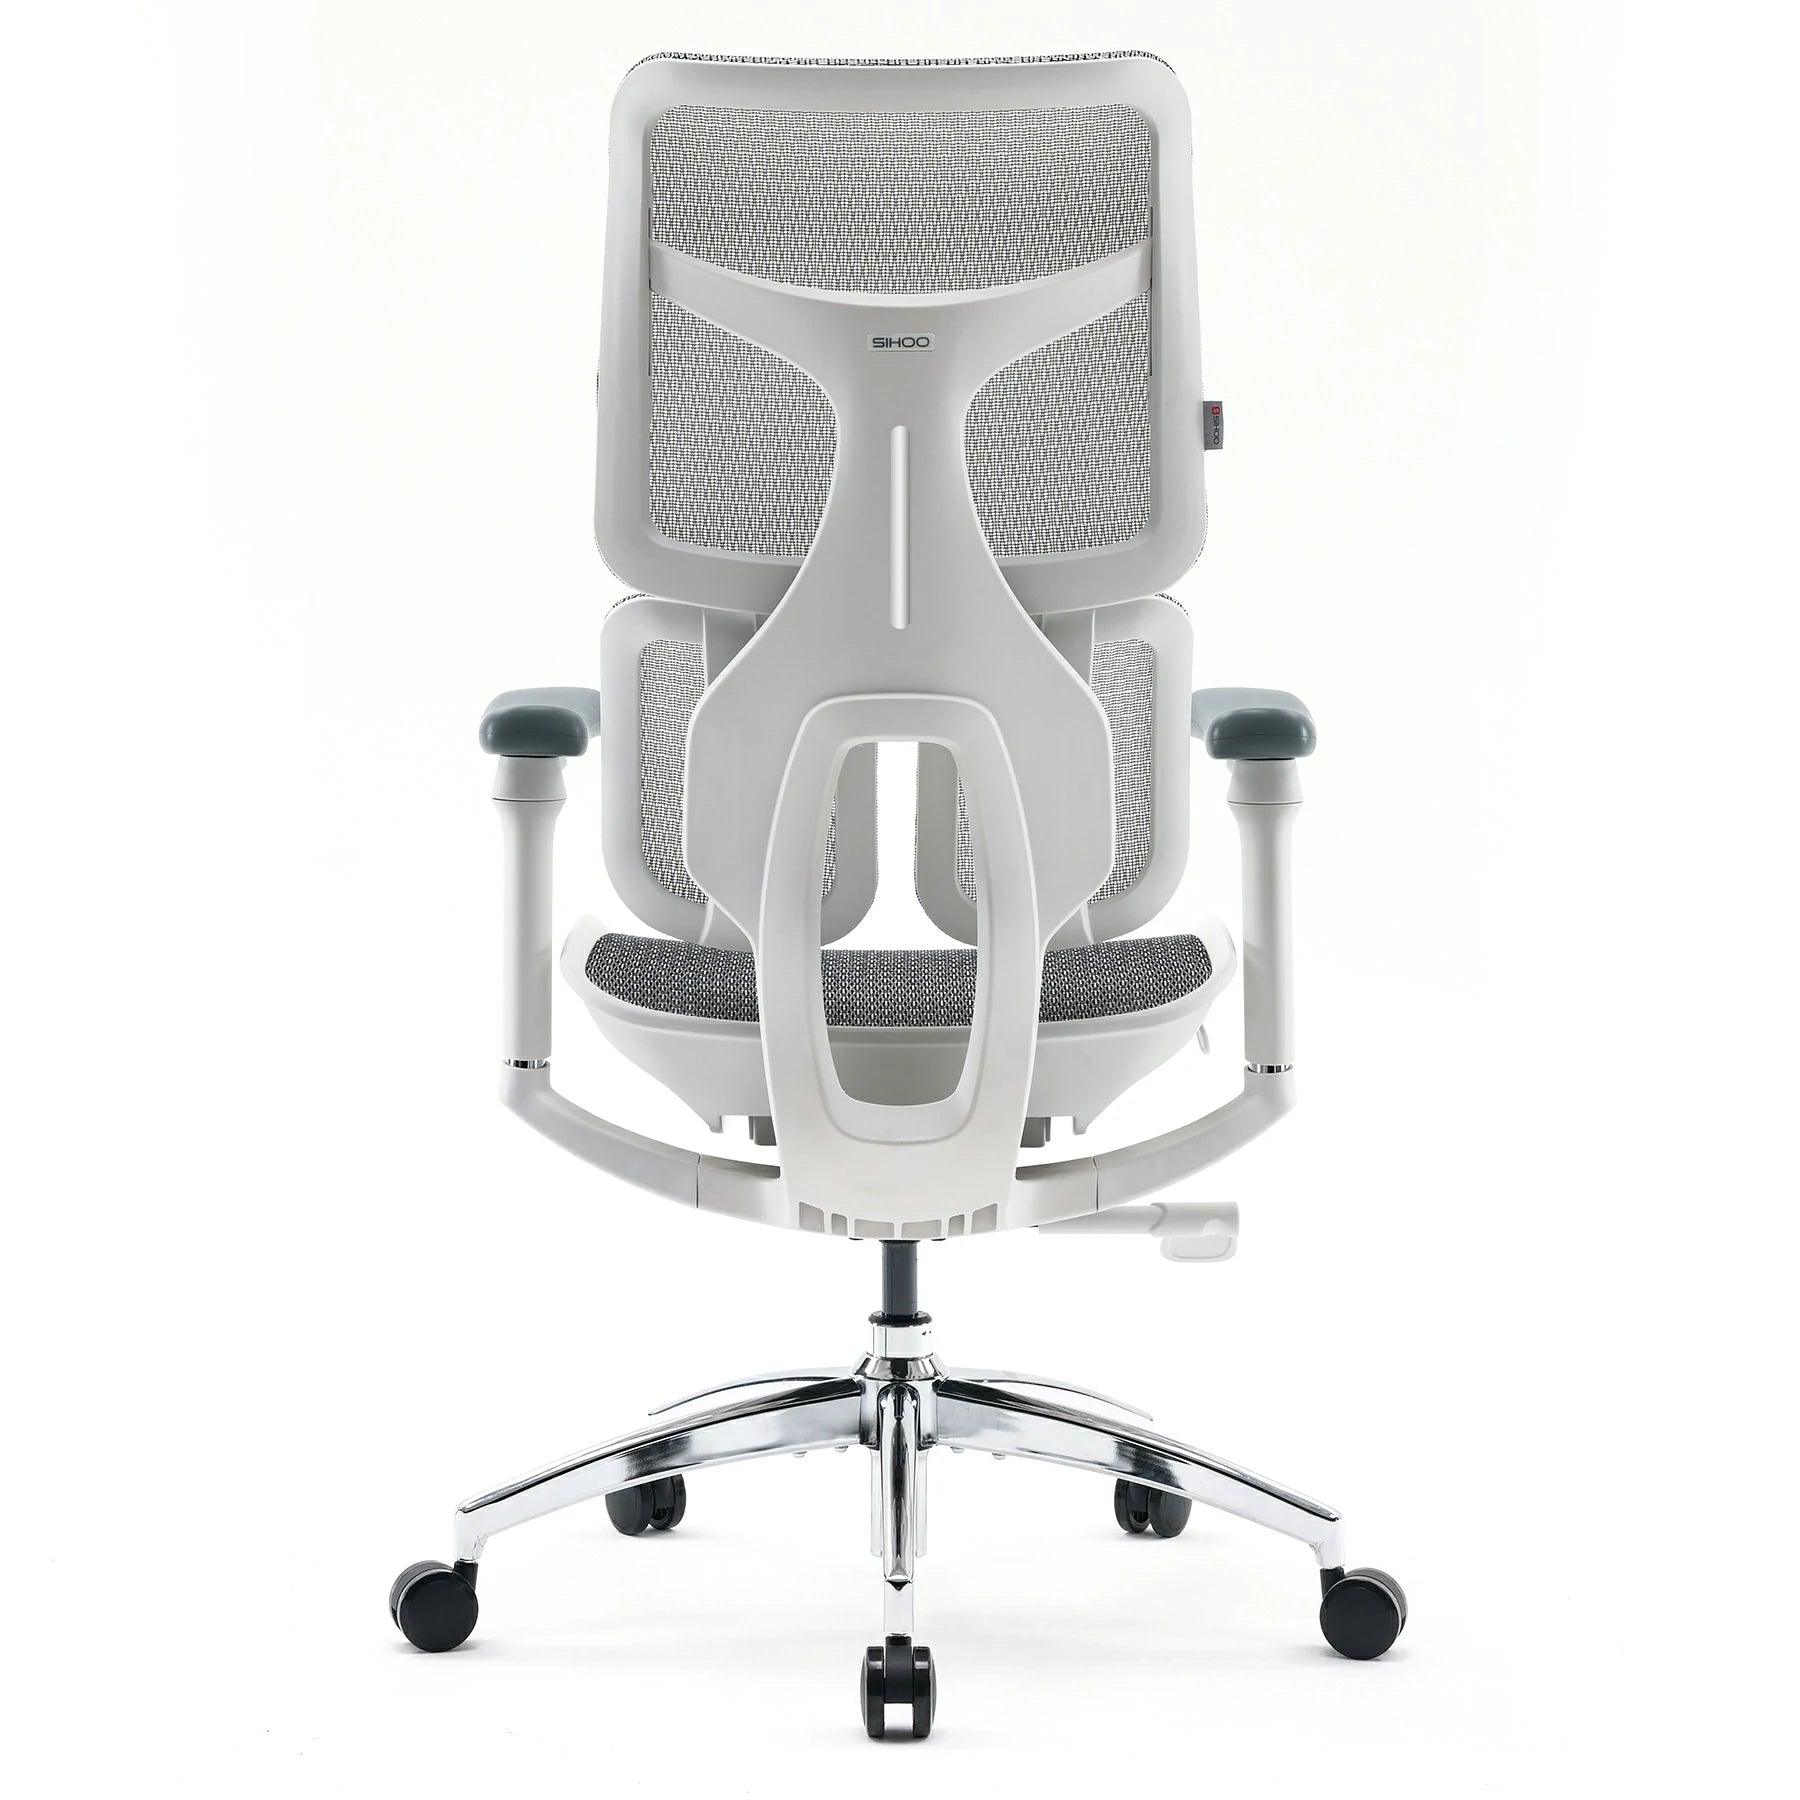 Sihoo Doro S100 Ergonomic Office Chair with Dual Dynamic Lumbar Support - Official US Sihoo Store